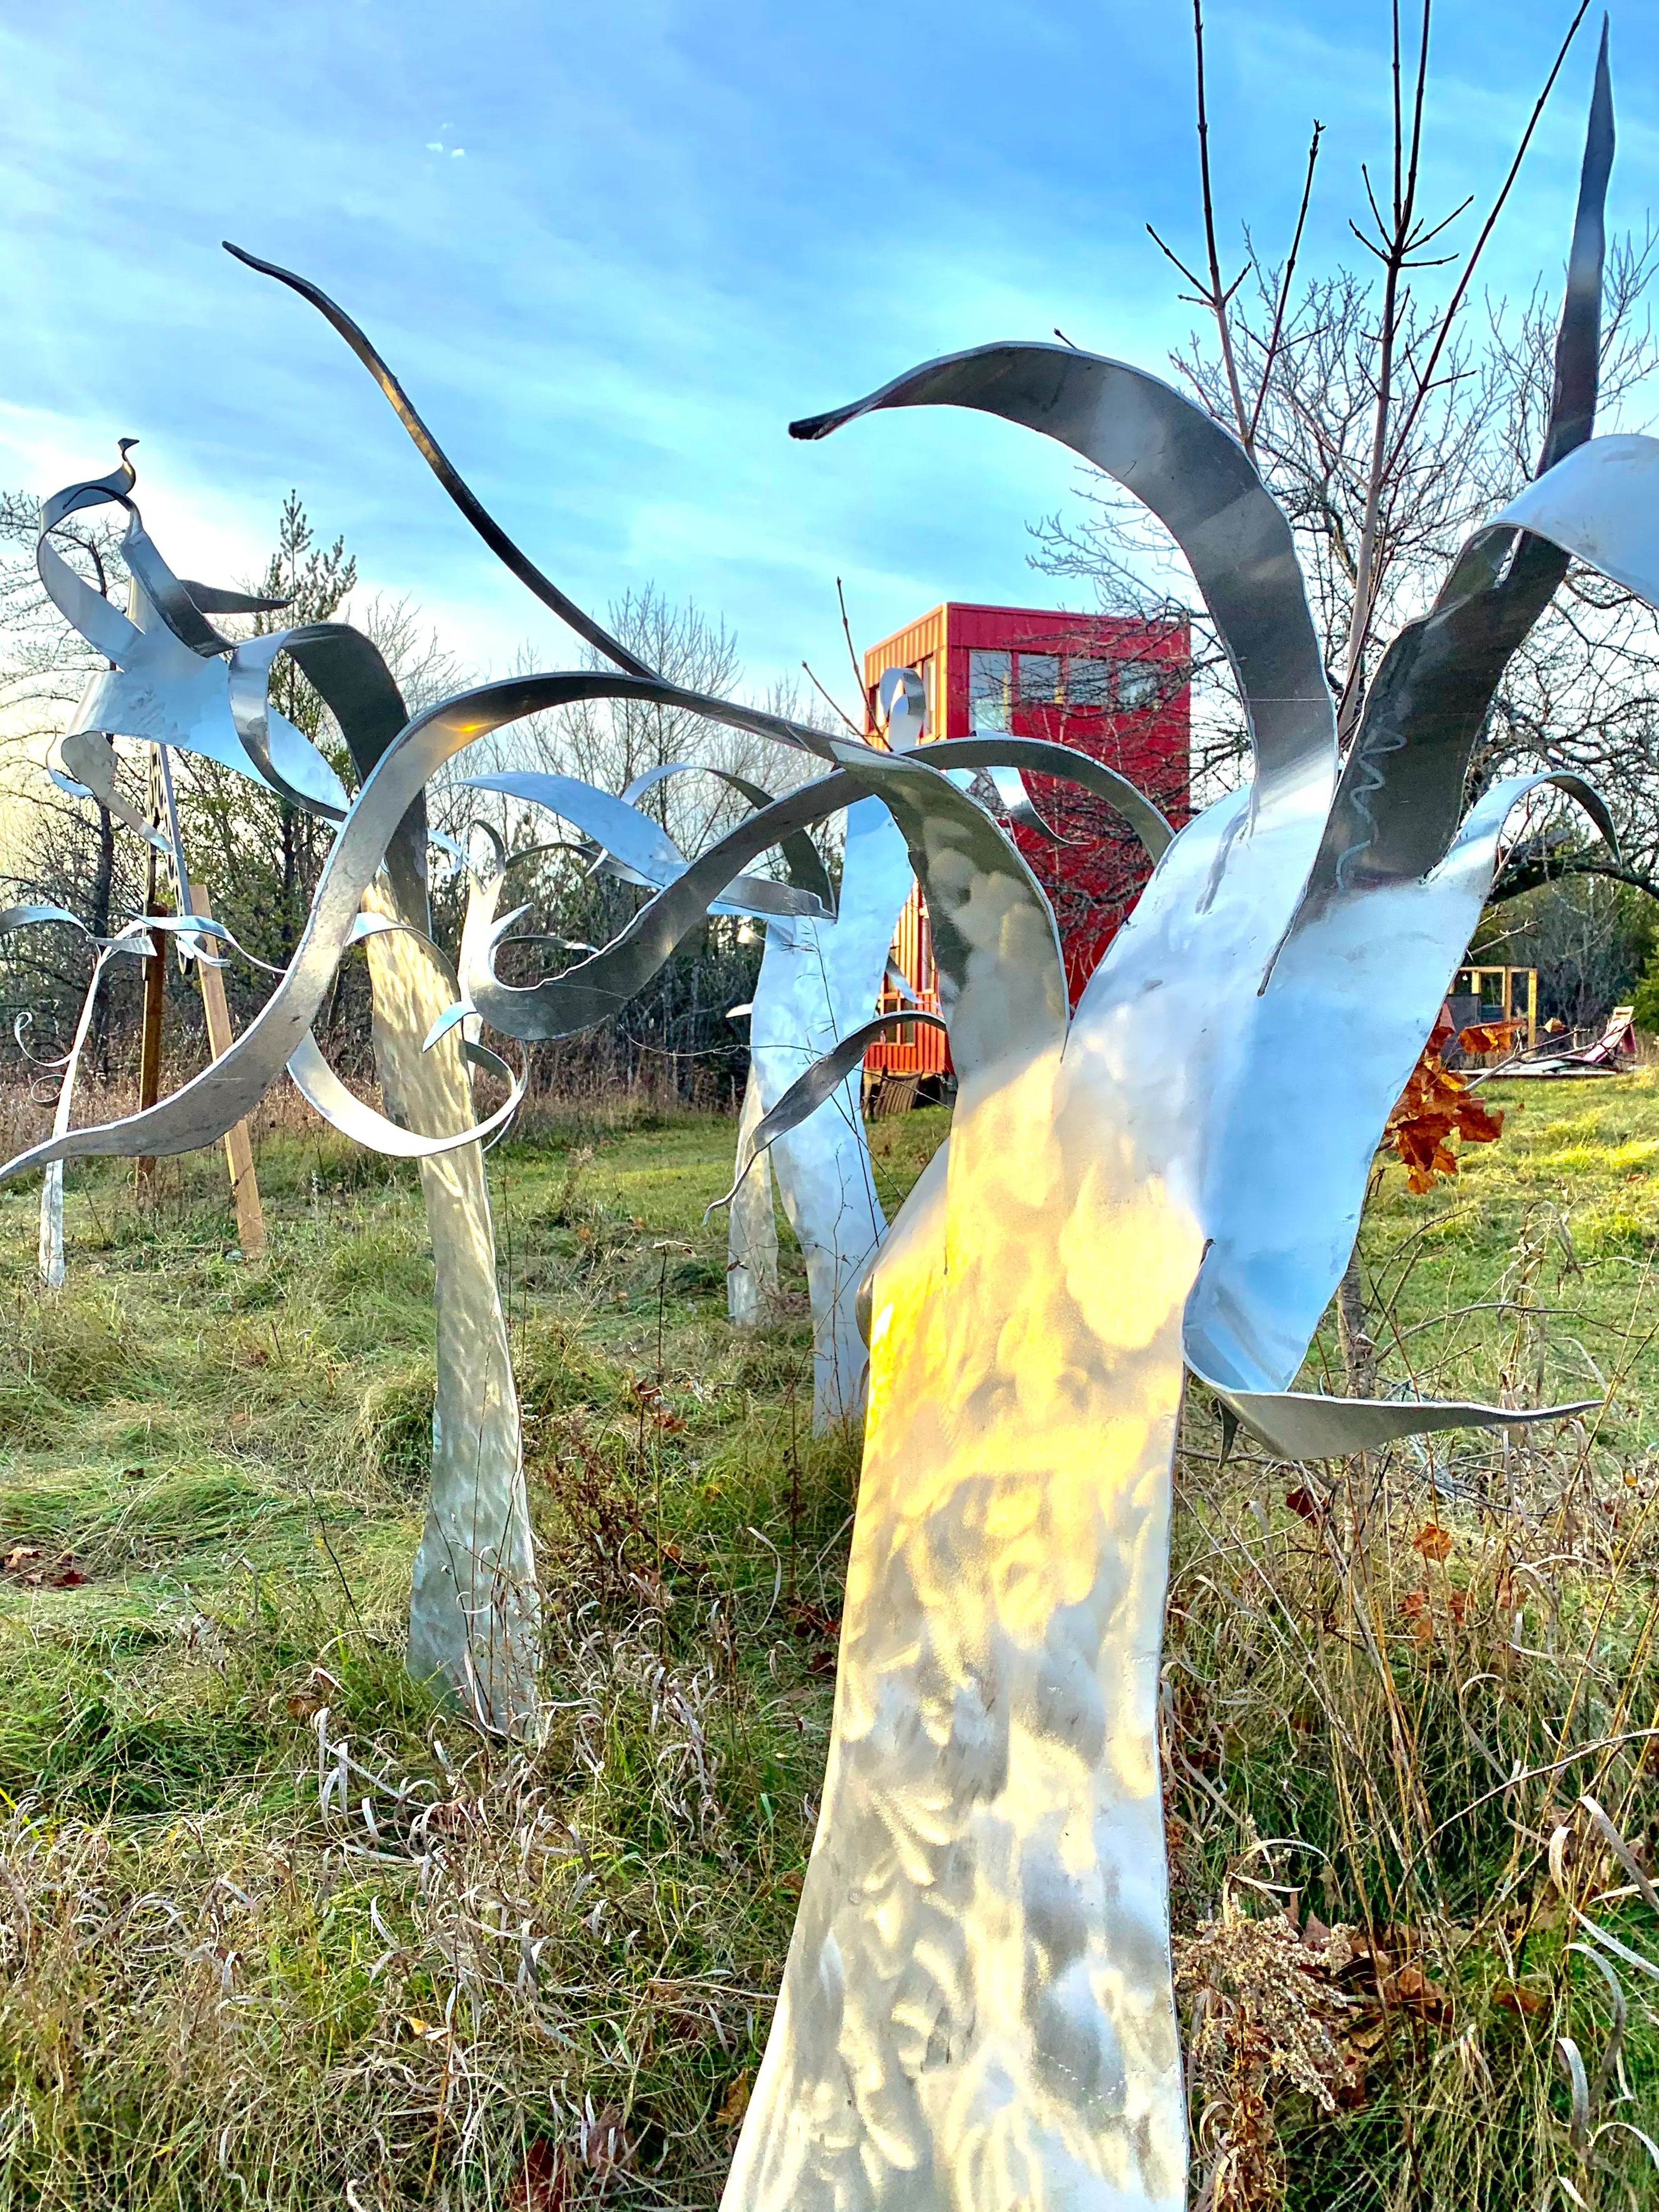 Photos of the metal forest art installation